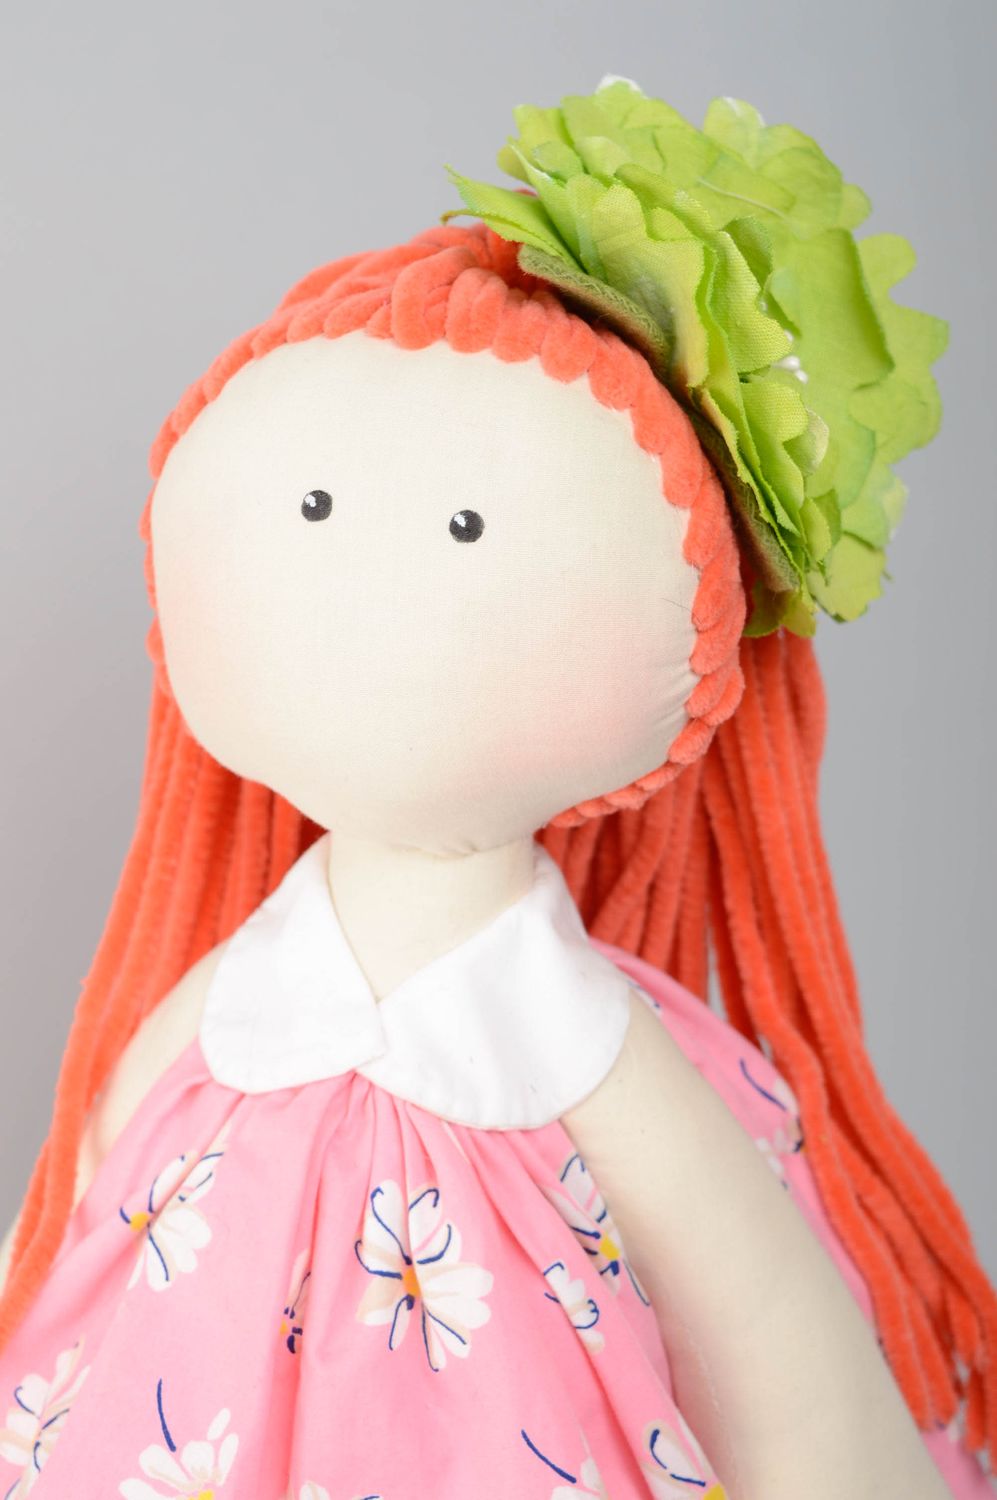 Designer doll with long red hair photo 2